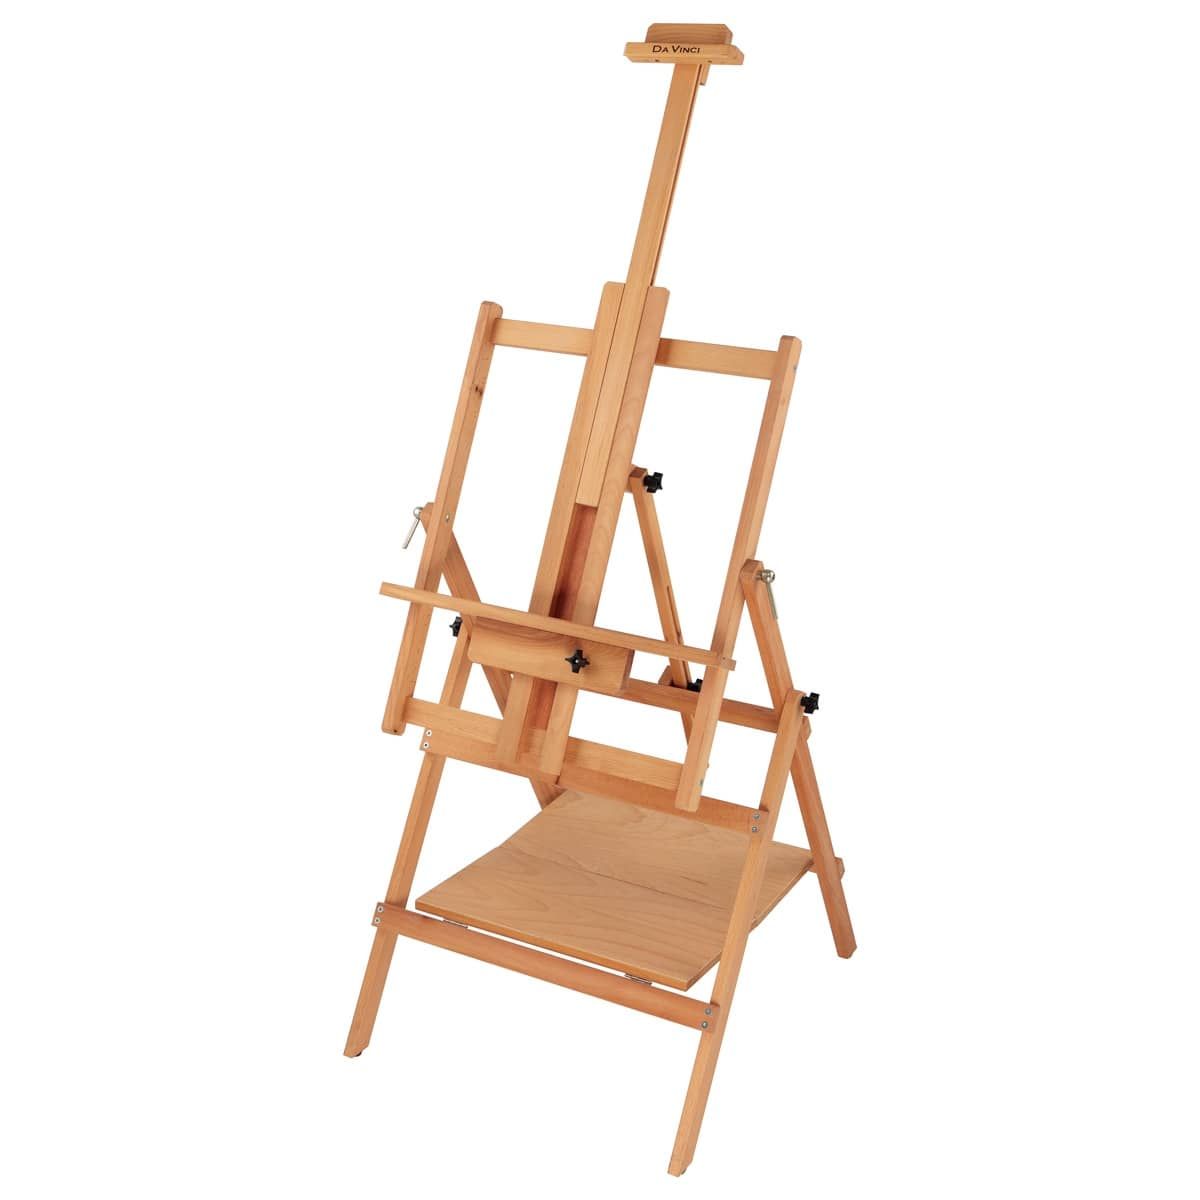 Adjustable Wood Tripod Easel Stand Display Floor Easels for Art Easel  Tabletop - China High Quality Painting, Teaching Easel